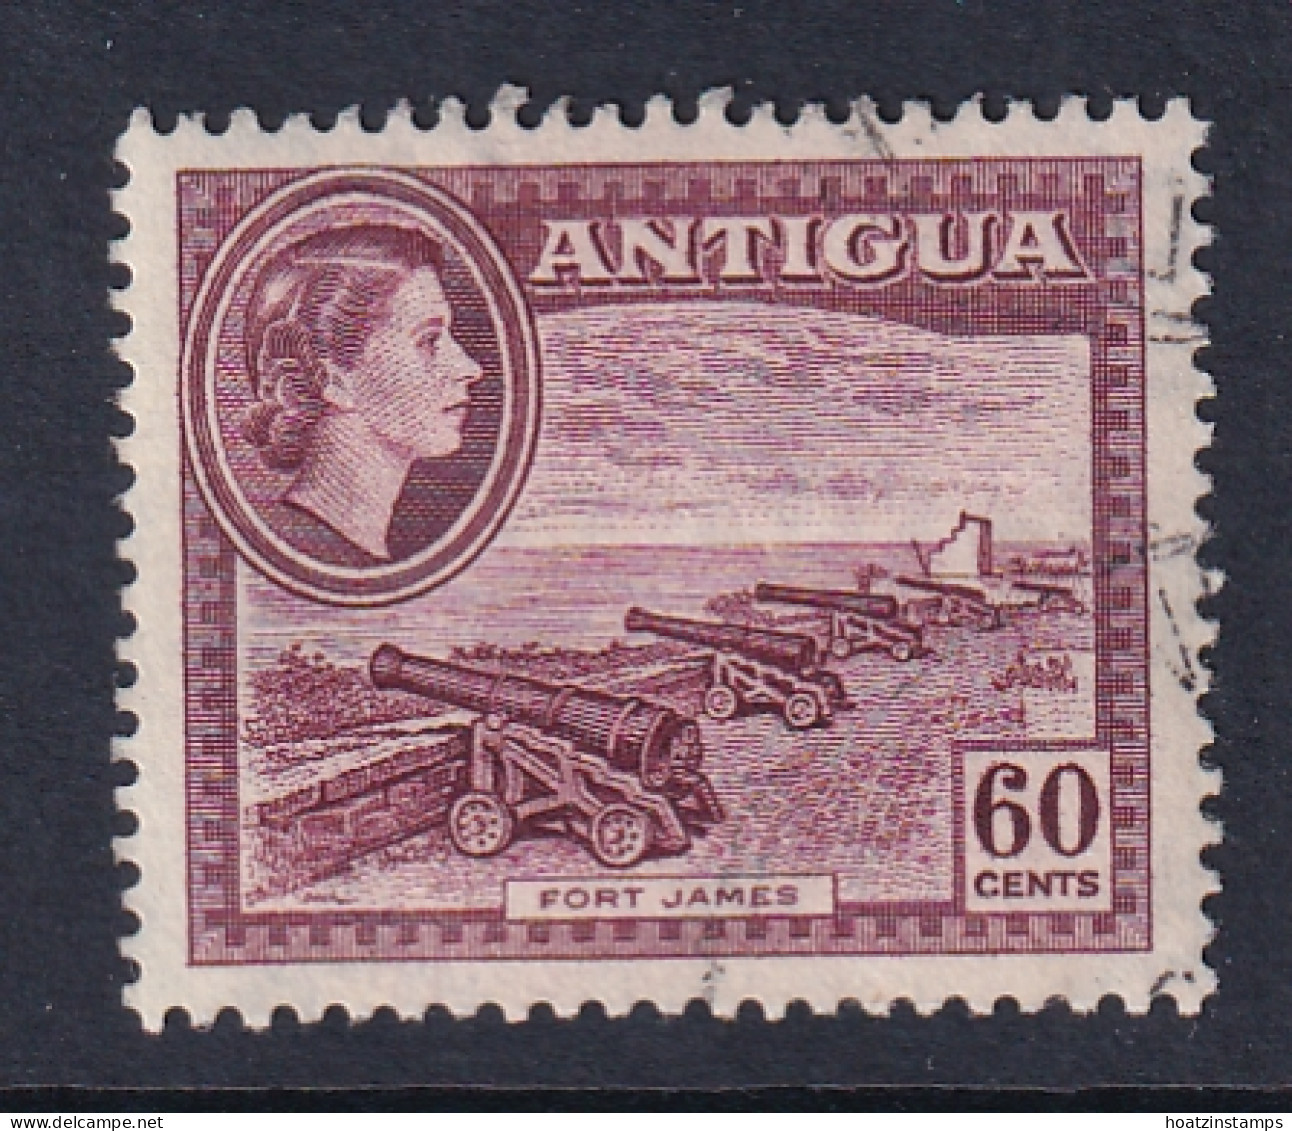 Antigua: 1953/62   QE II - Pictorial     SG131    60c     Used - 1858-1960 Crown Colony